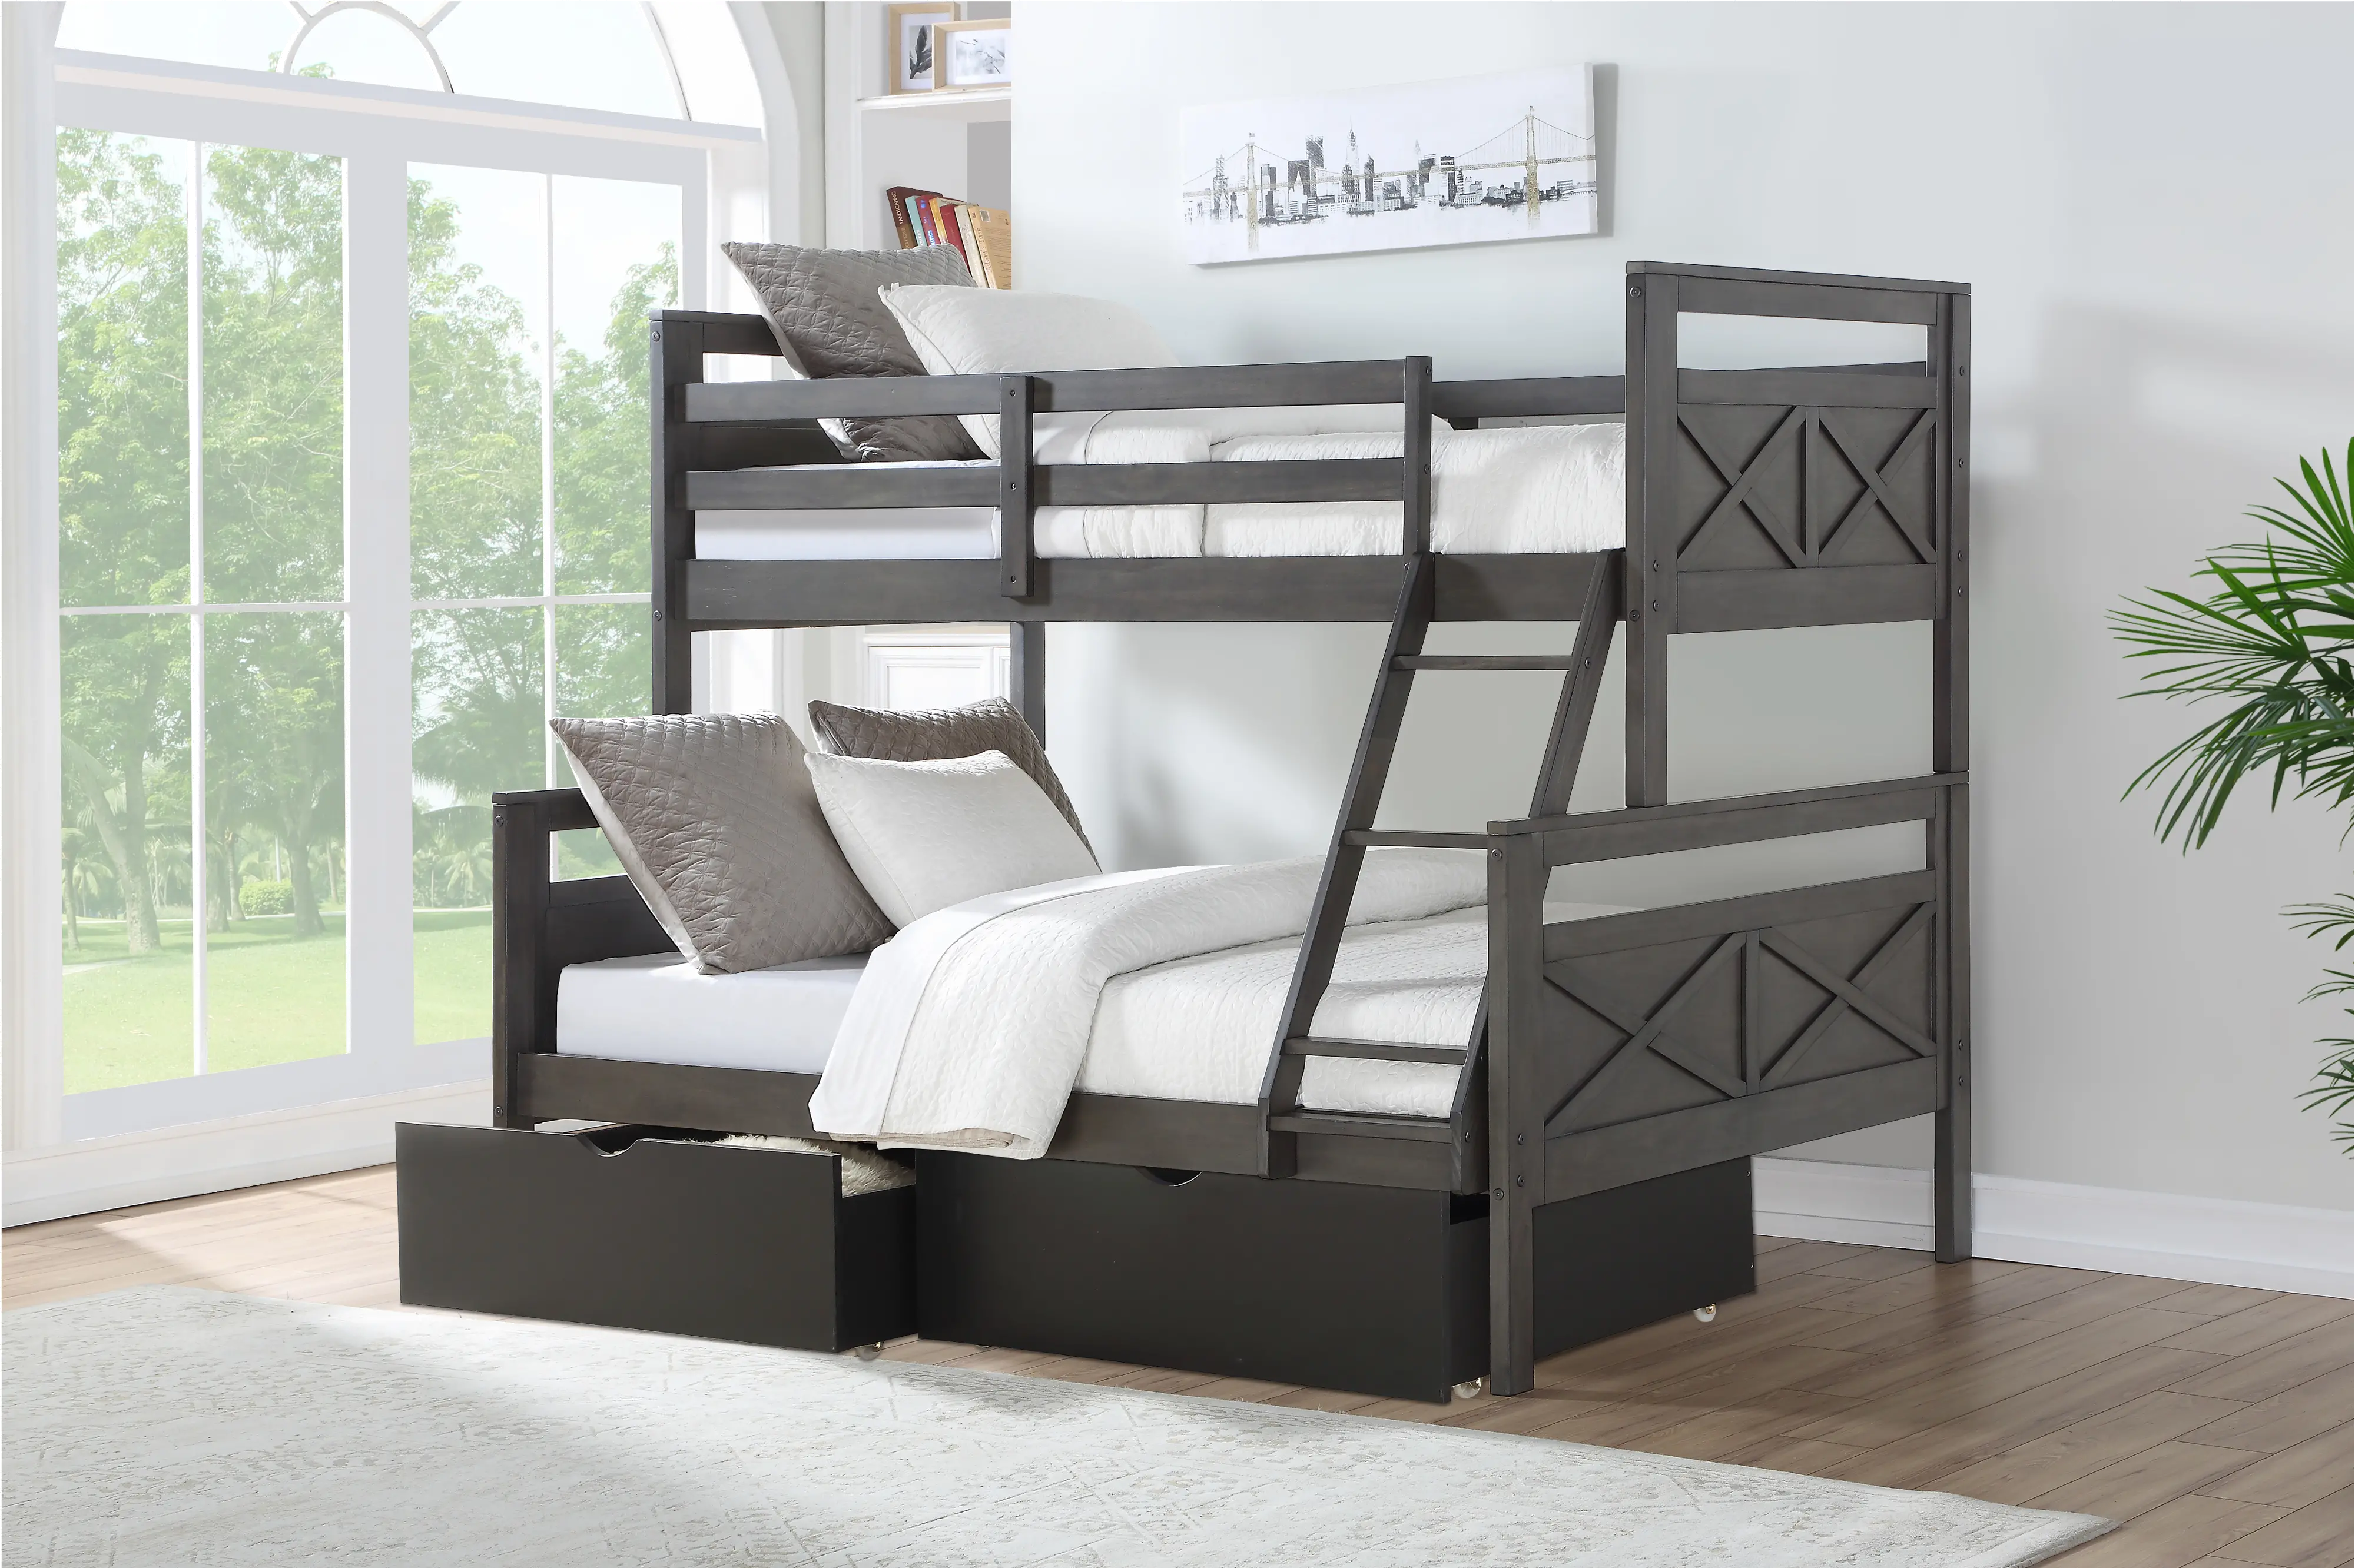 0518-TFRG505-BK Rustic Gray Twin over Full Bunk Bed with Storage D sku 0518-TFRG505-BK